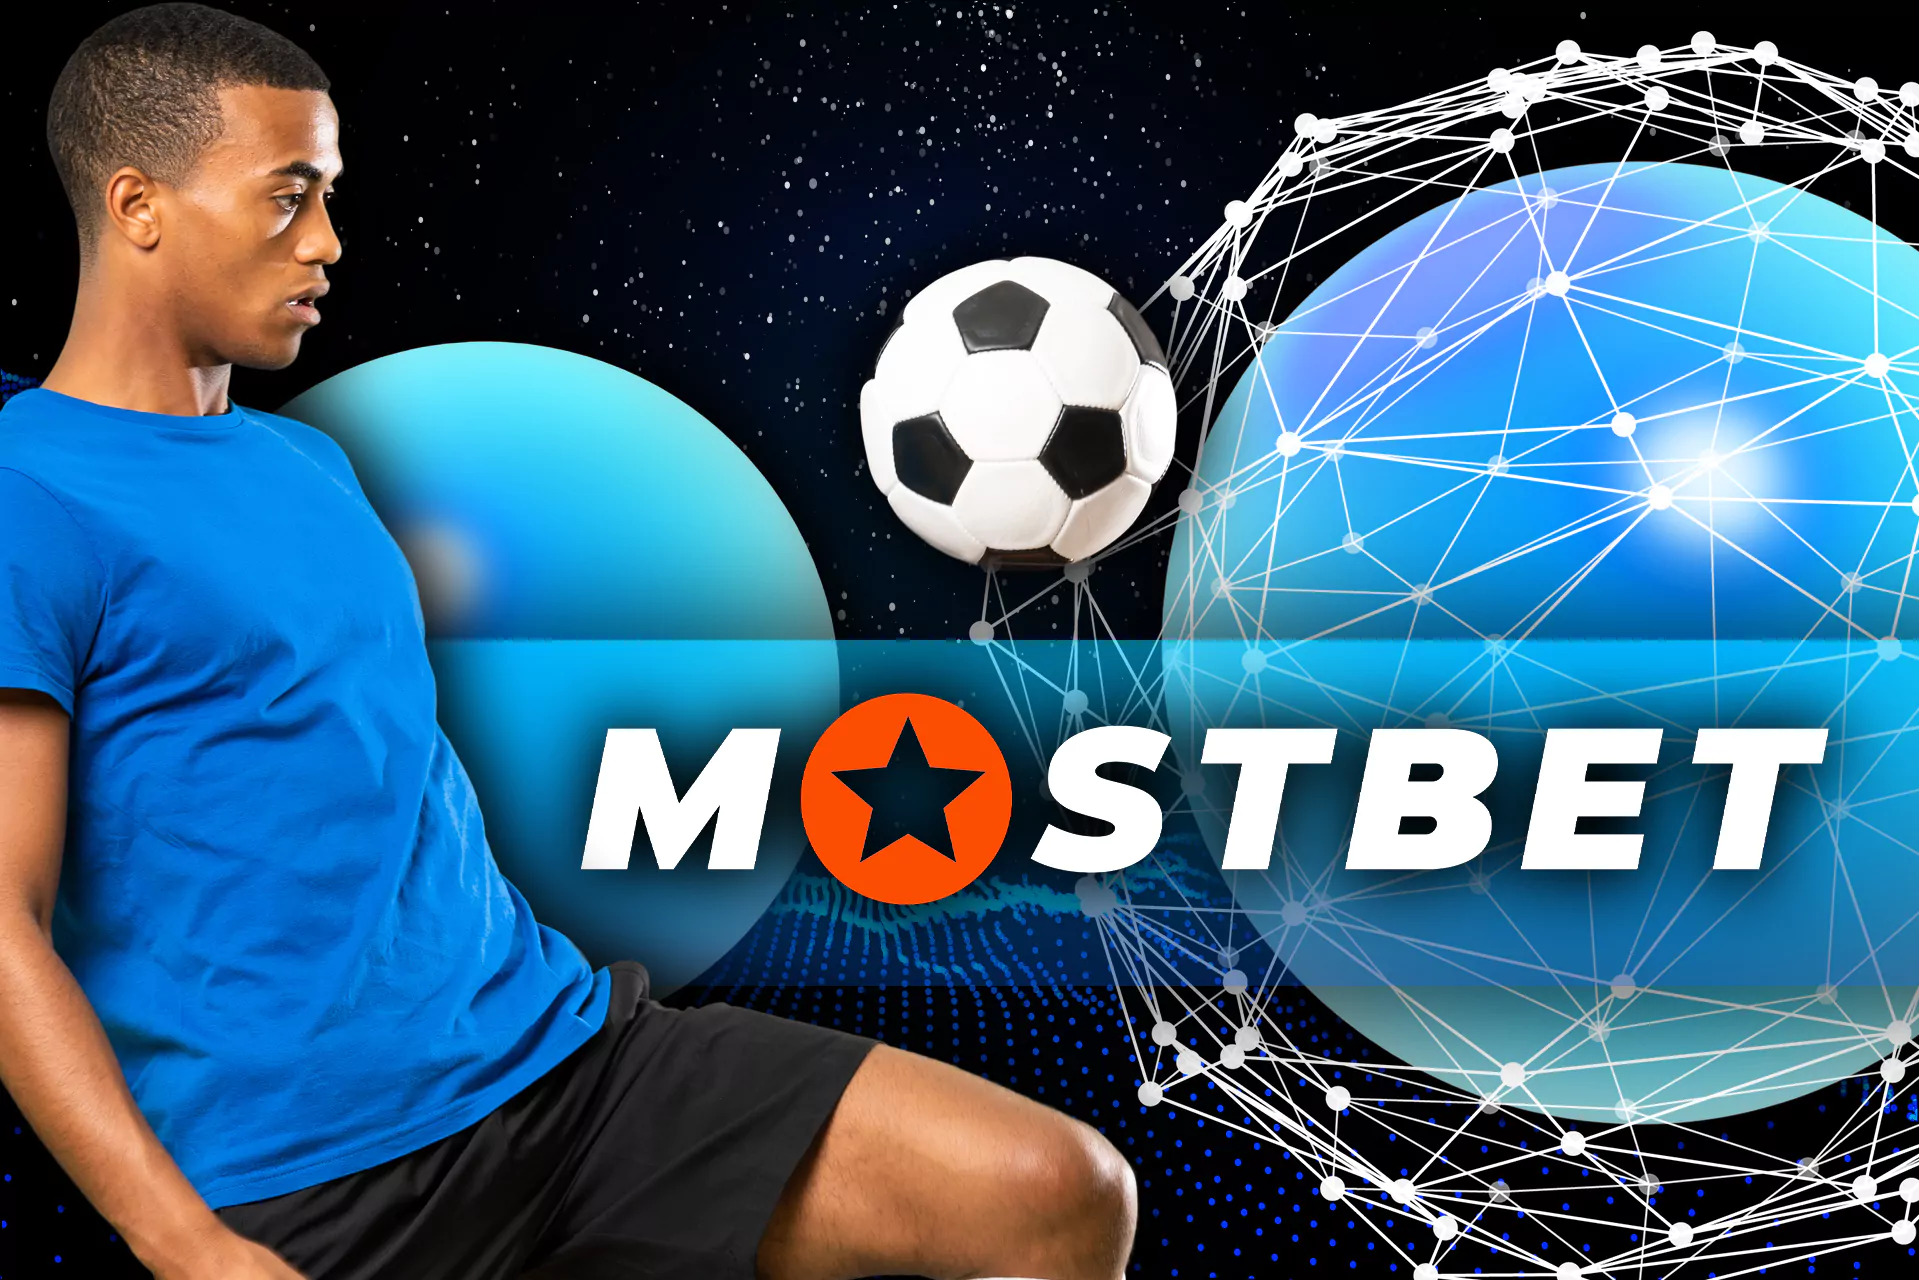 Football at Mostbet.